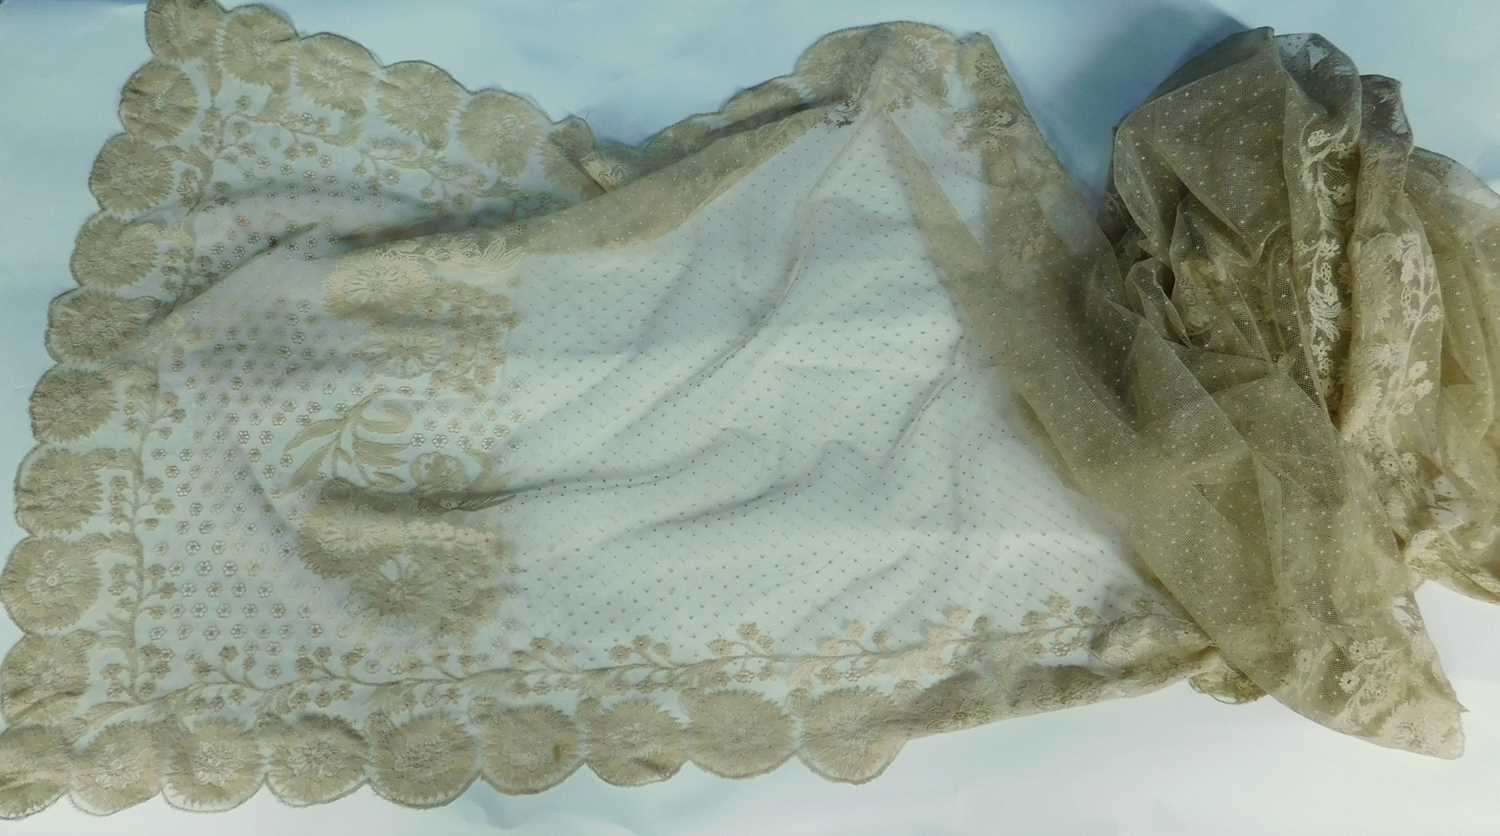 A Nottingham lace shawl with scalloped floral edges, with a border of flowers and all over dot and